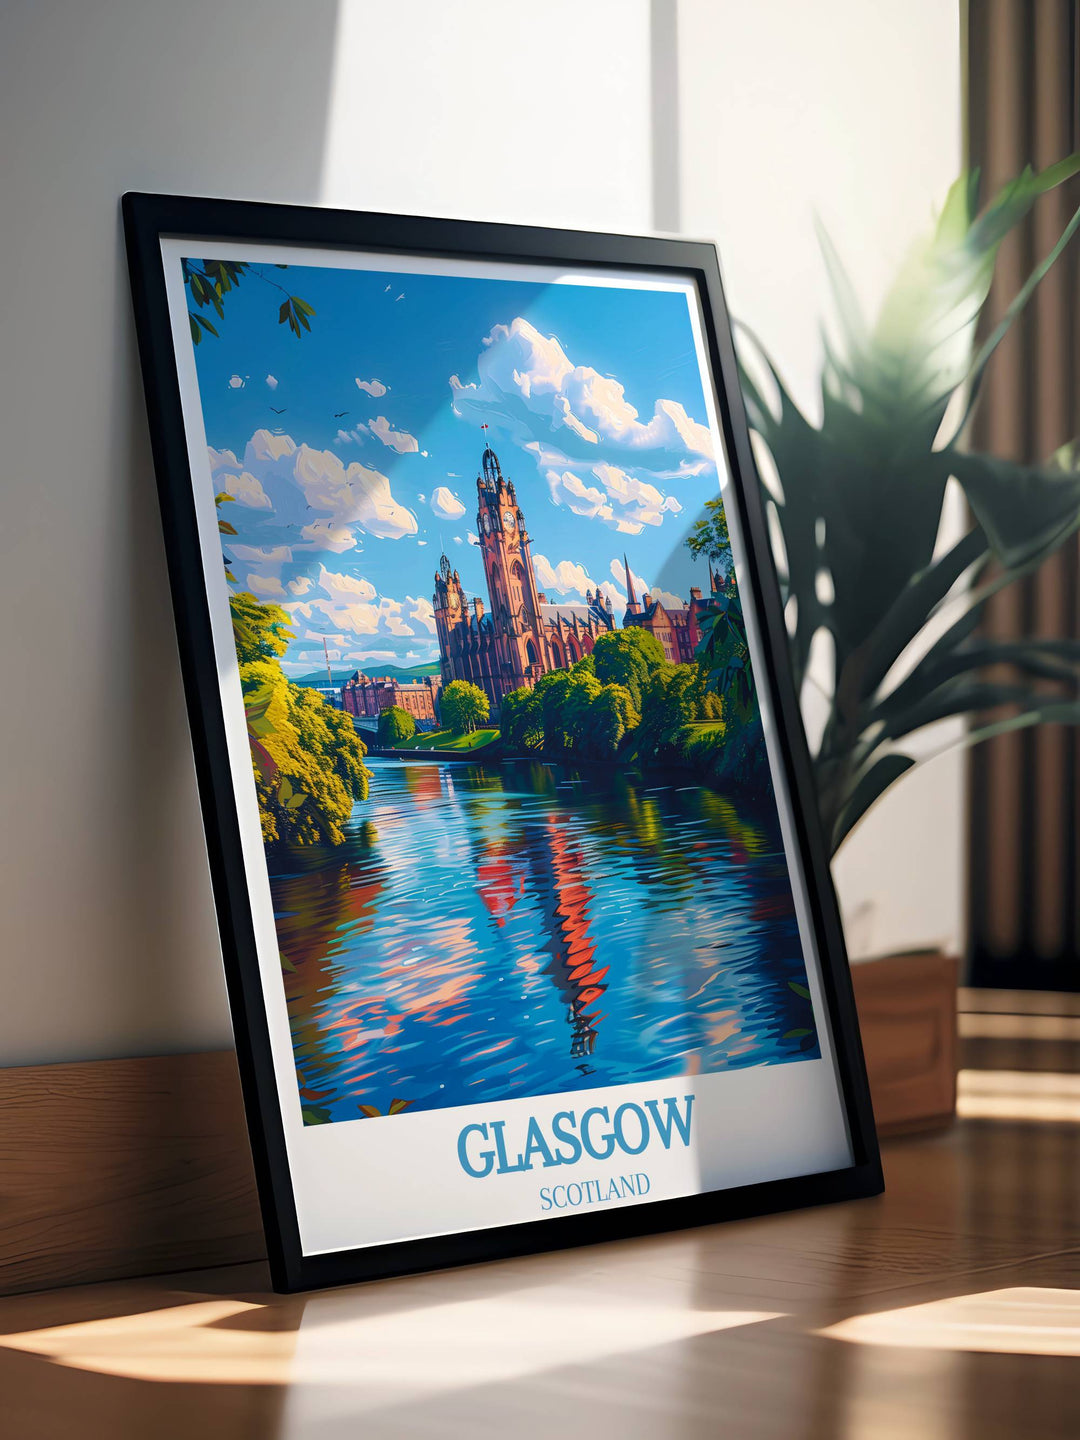 Transport yourself to Glasgows lively culture with vibrant posters capturing its energy and rhythm.